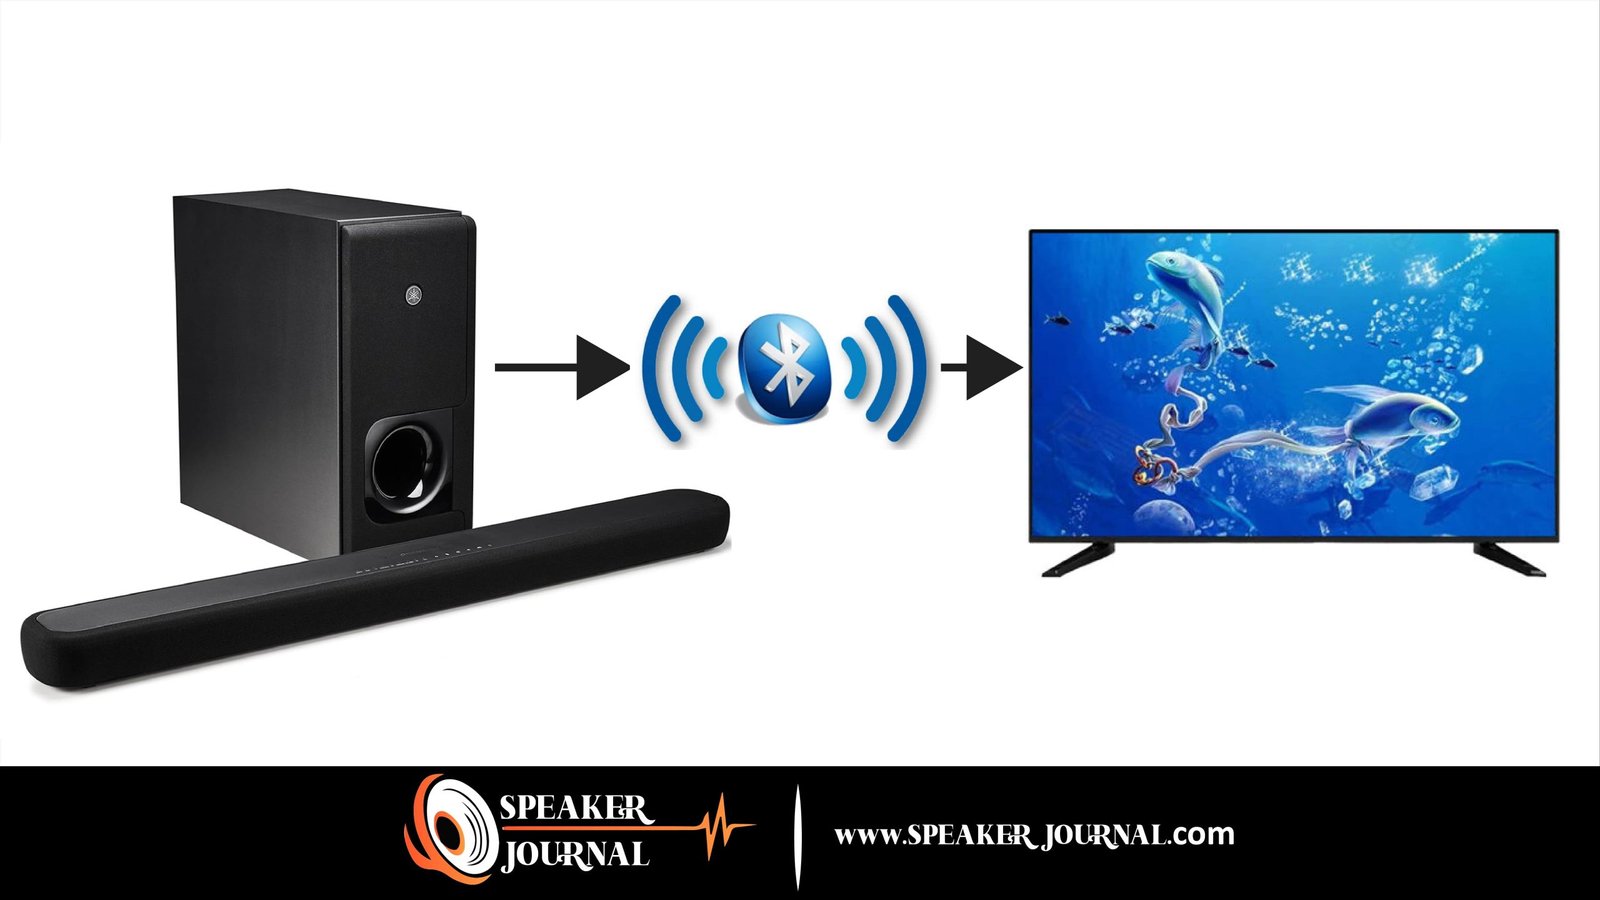 How To Connect Yamaha Soundbar To TV by speakerjournal.com